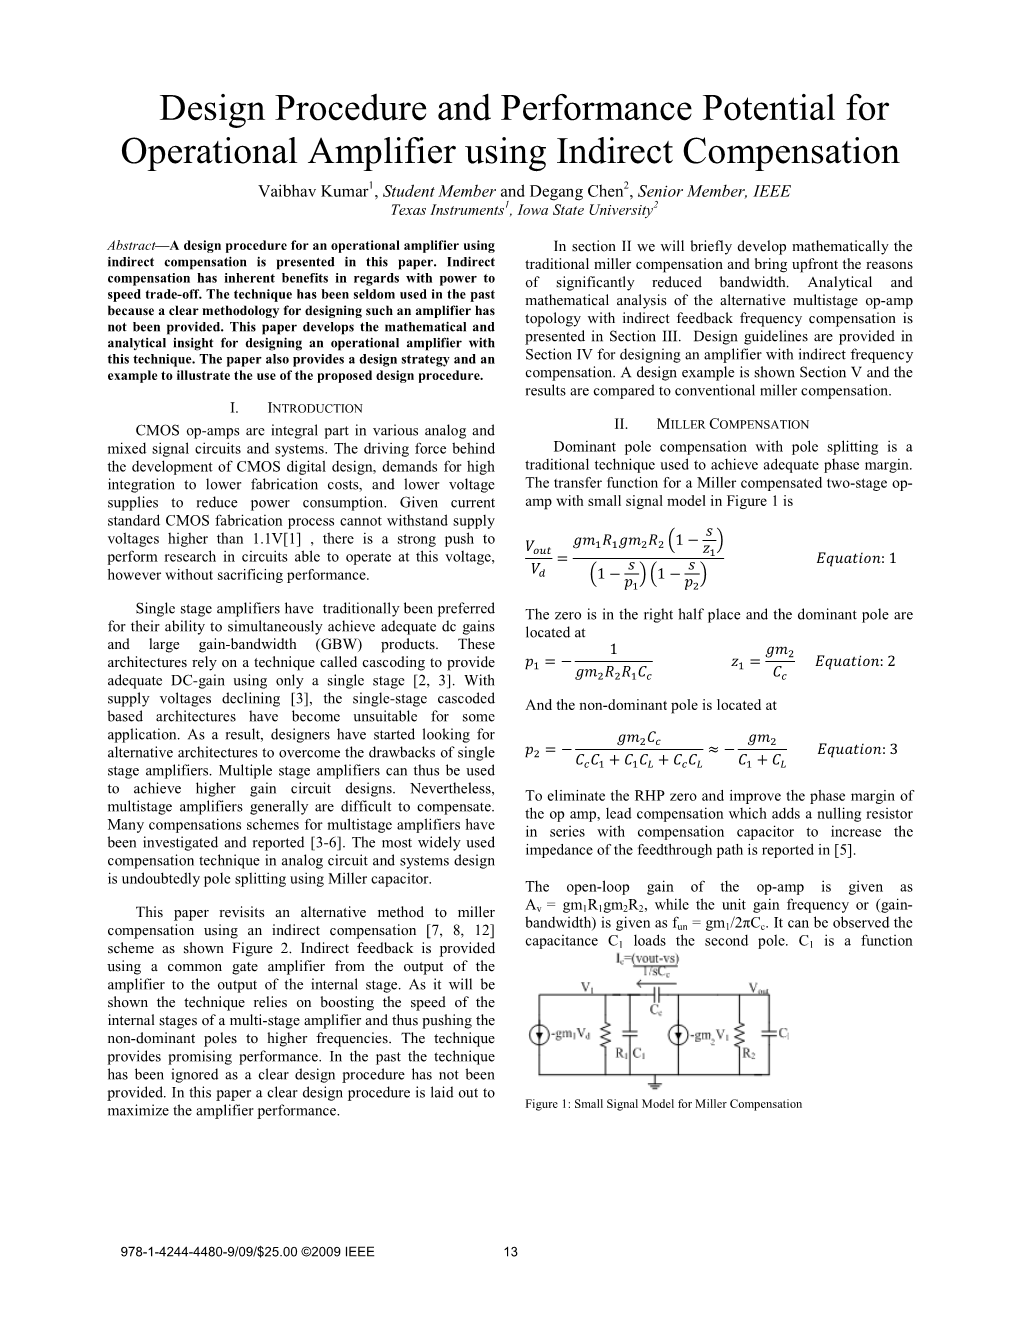 Design Procedure and Performance Potential for Operational Amplifier